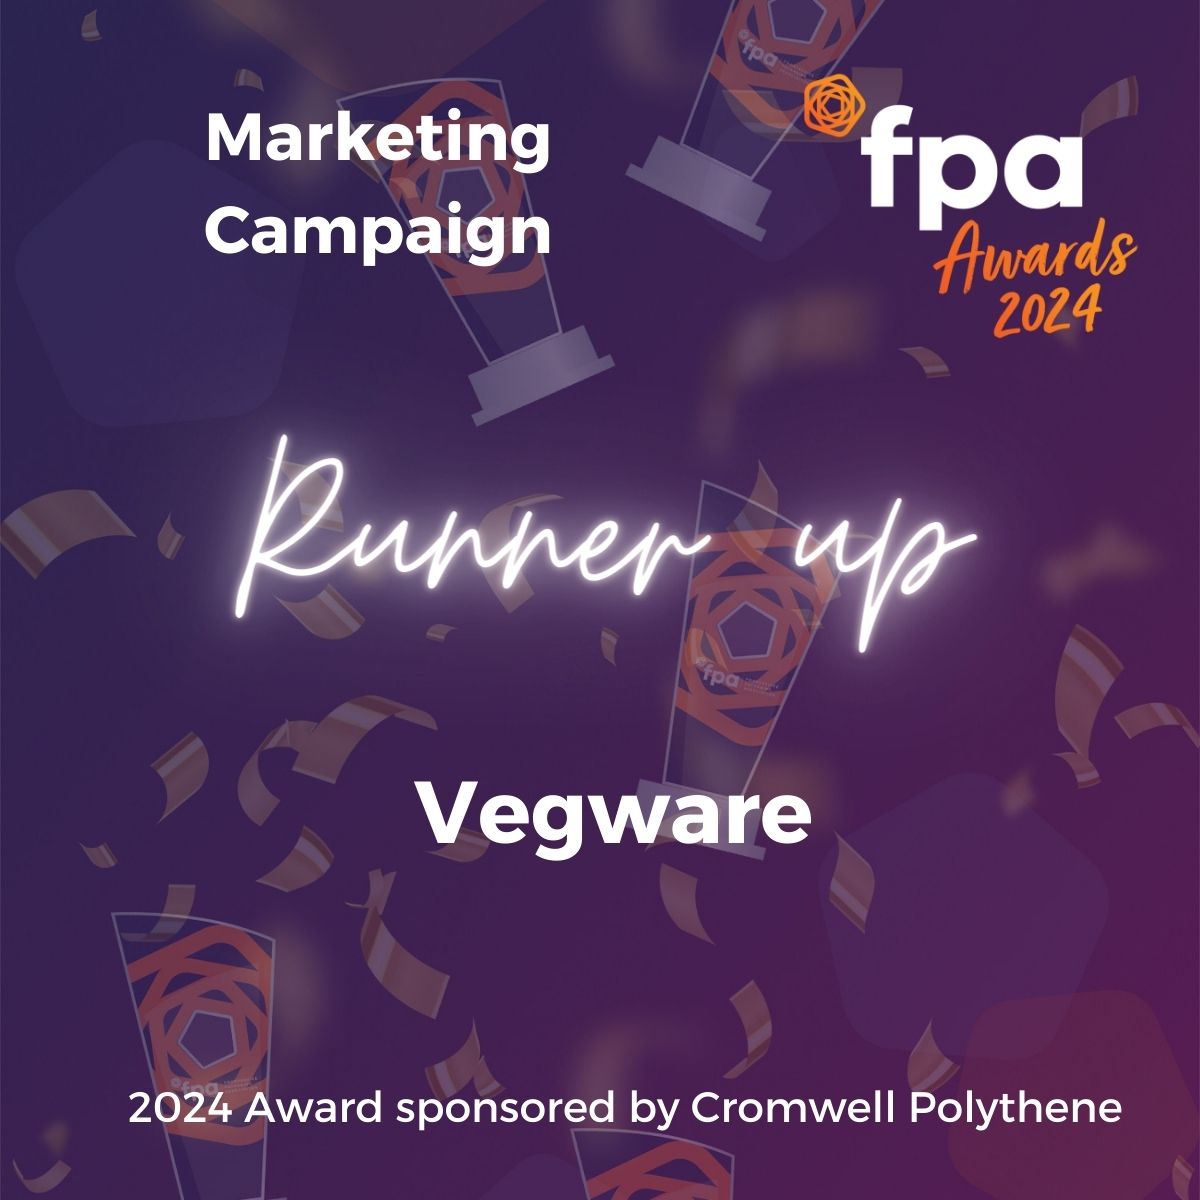 Runner-up for the Marketing Campaign Award, sponsored by @CromwellPoly is @vegware for Make the Switch

#FPA2024Awards